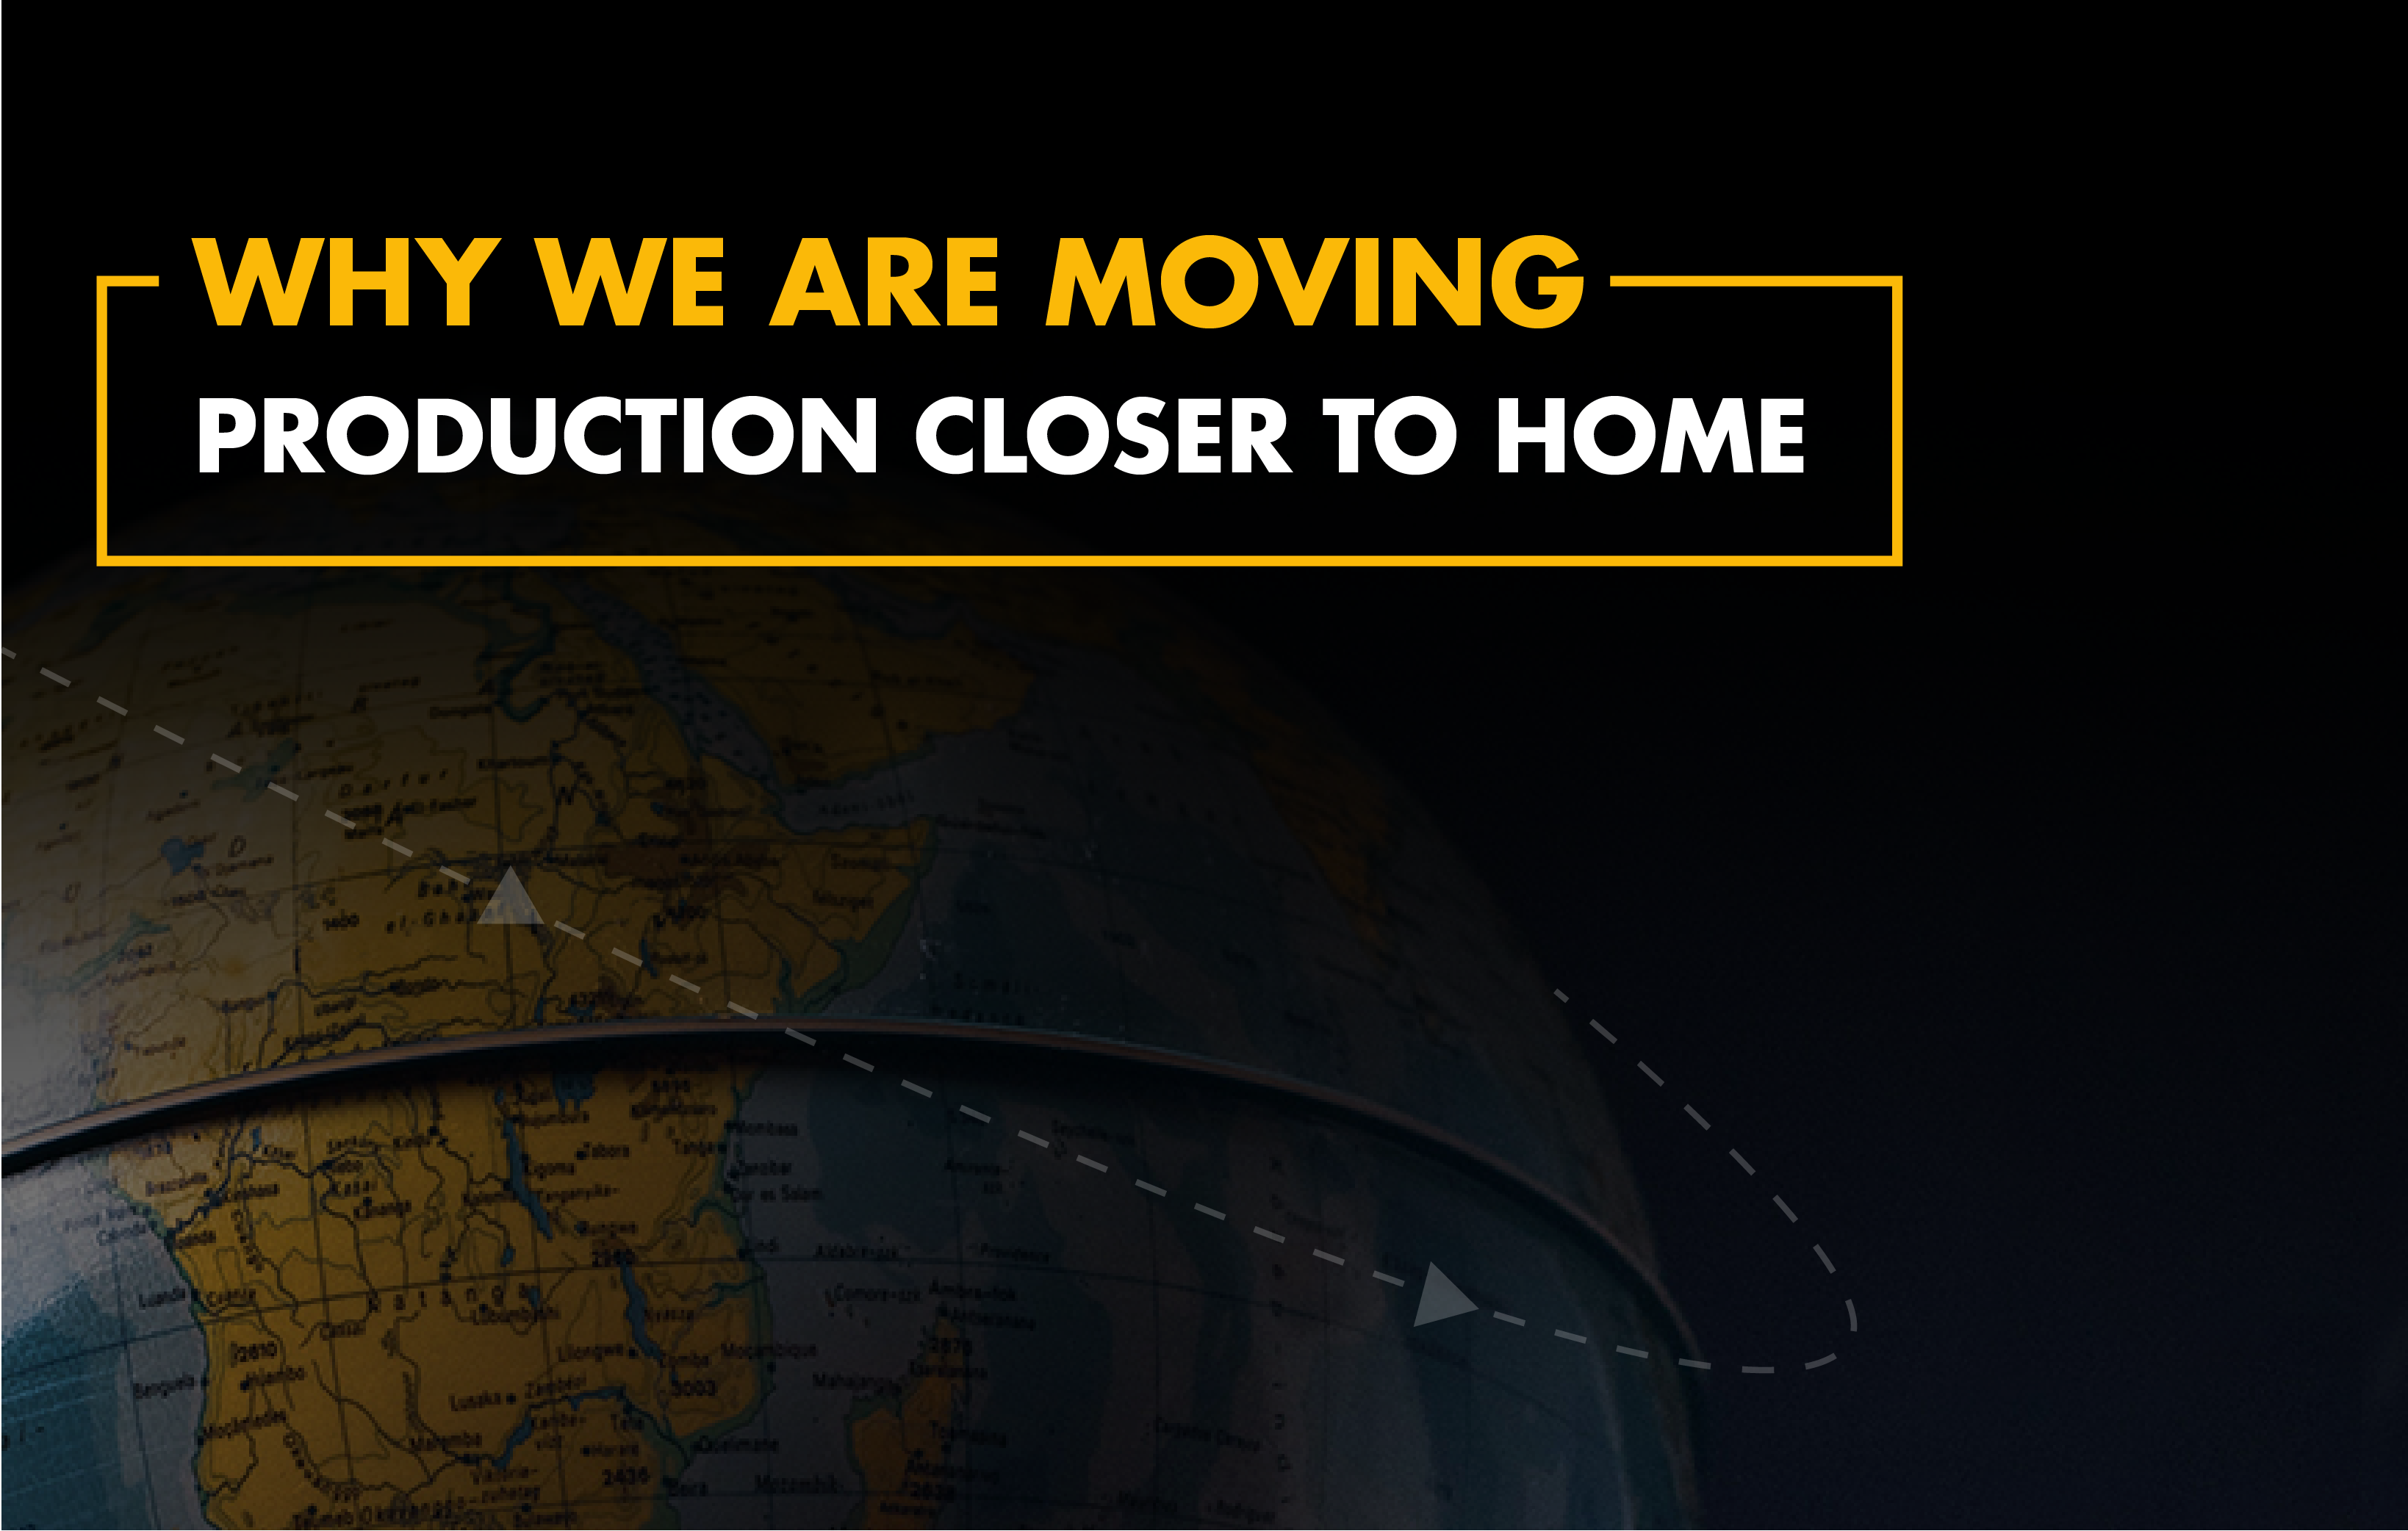 Why we are moving production closer to home